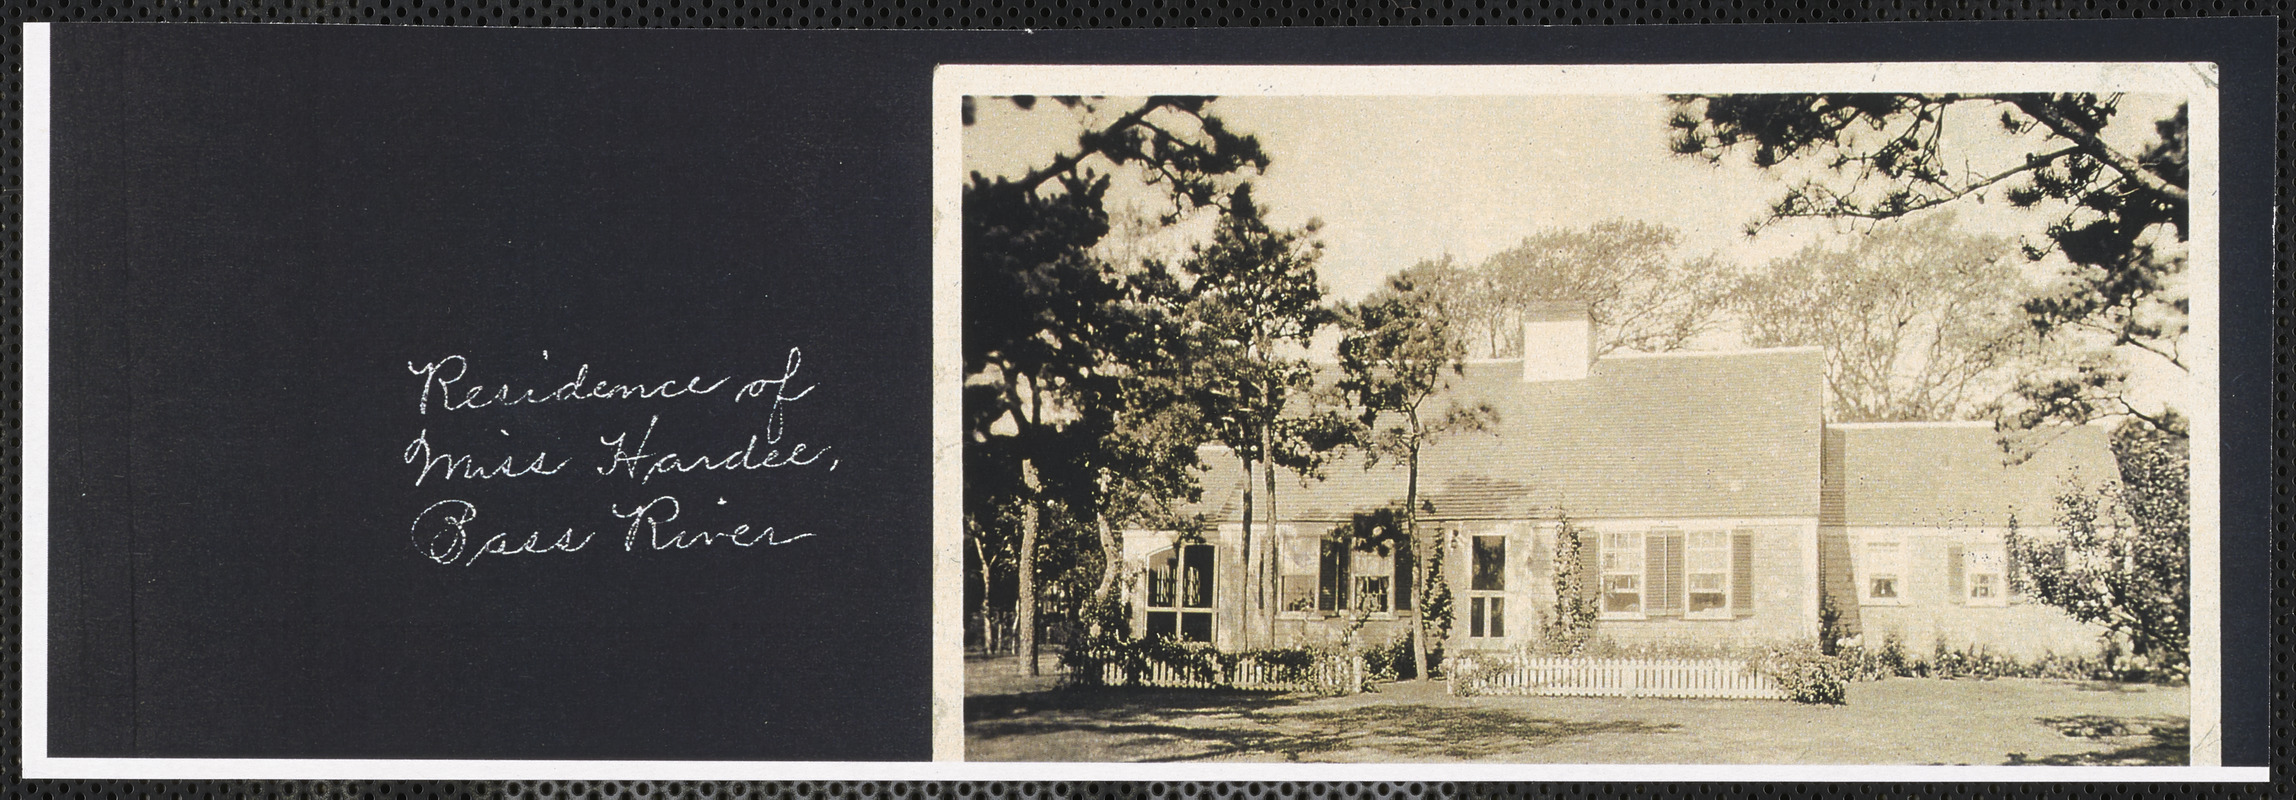 149 River St., South Yarmouth, Mass., residence of Miss Hardee, Bass River